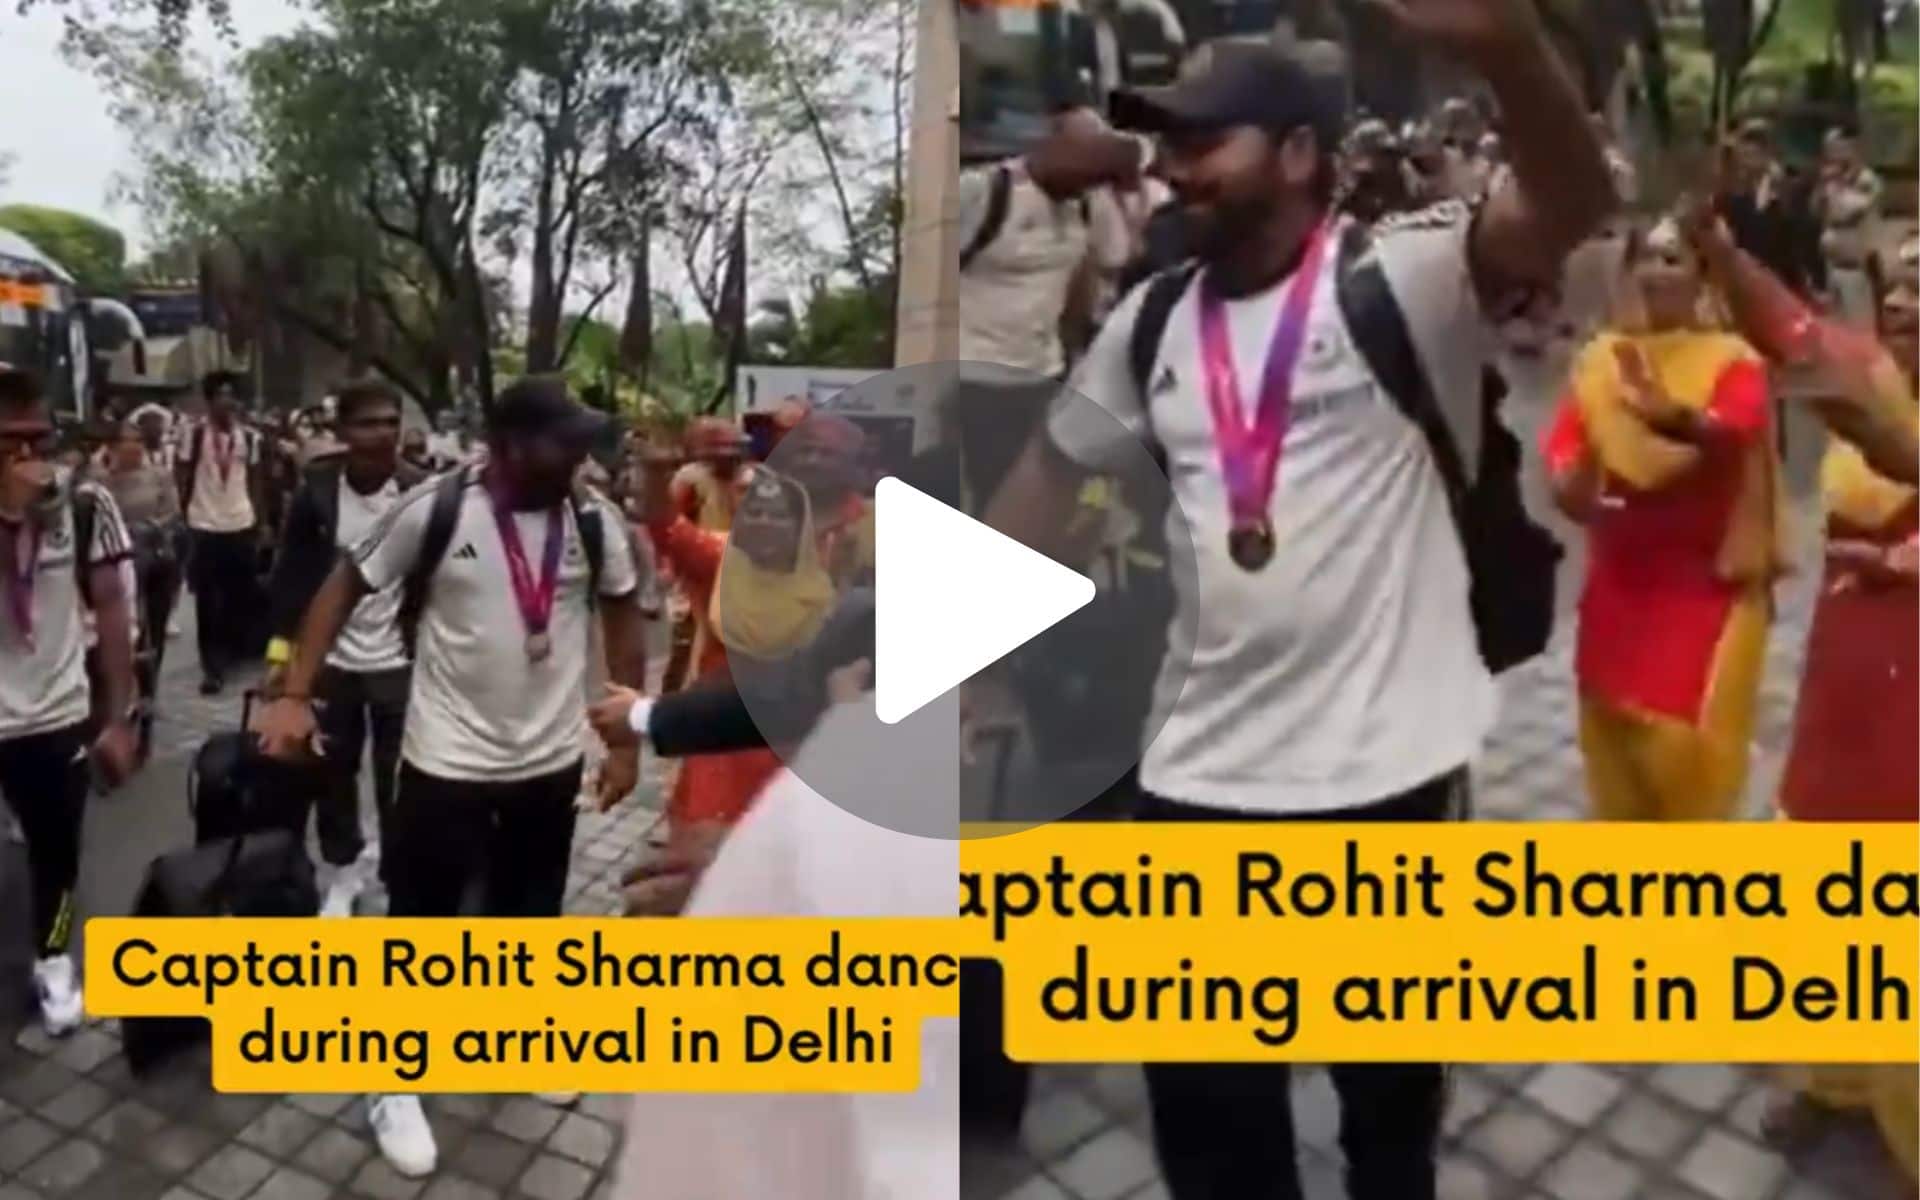 [Watch] T20 World Cup Champion Captain, Rohit Sharma's Bhangra Dance in Delhi Goes Viral